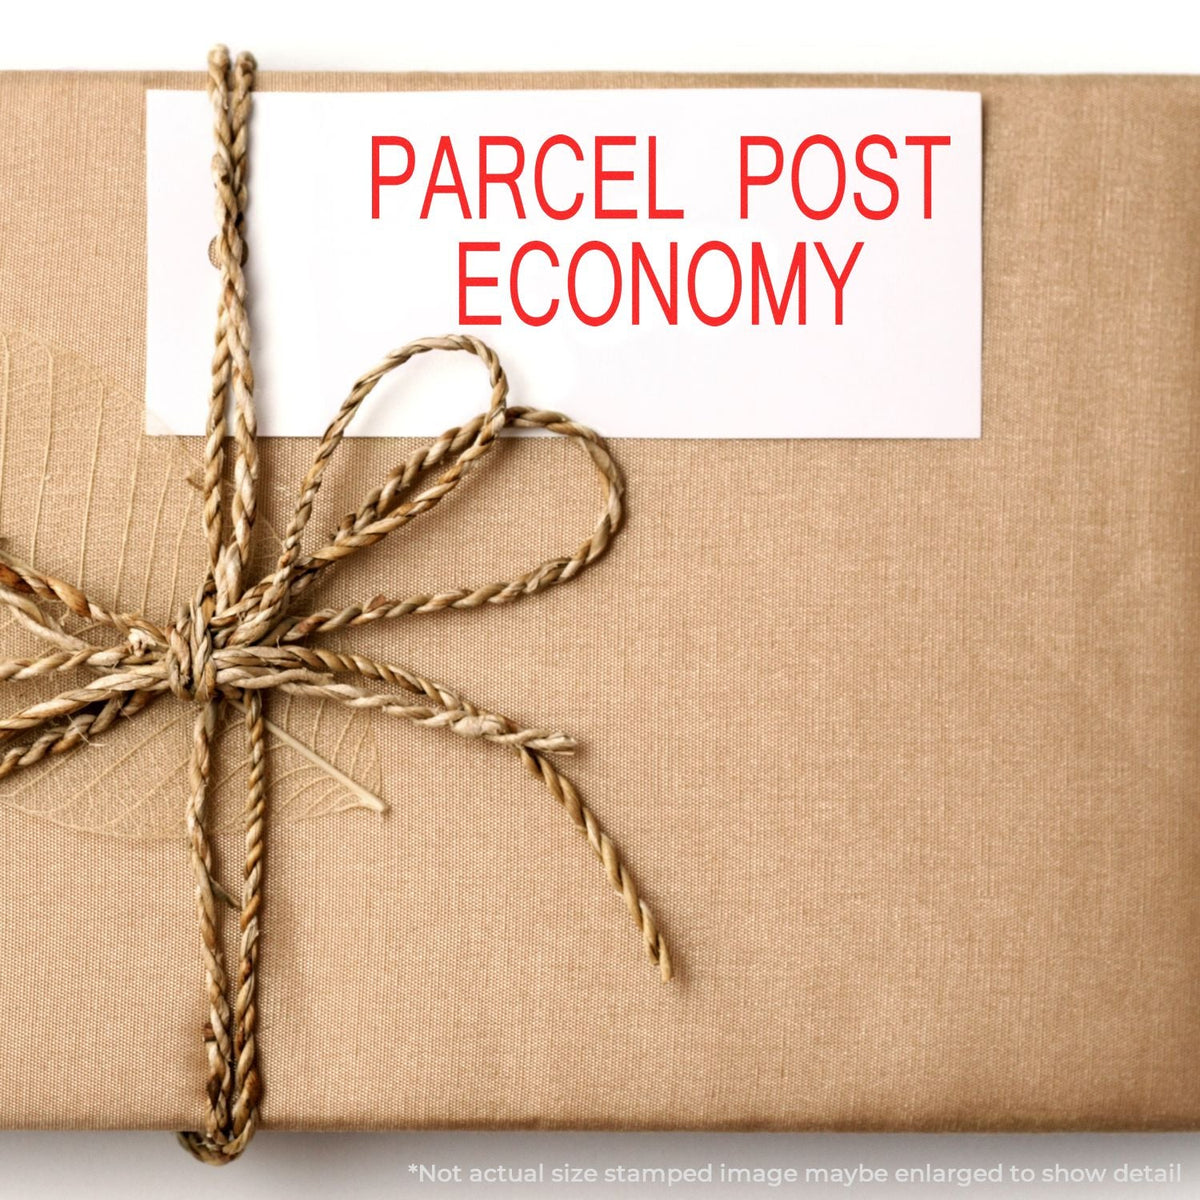 In Use Self-Inking Parcel Post Economy Stamp Image